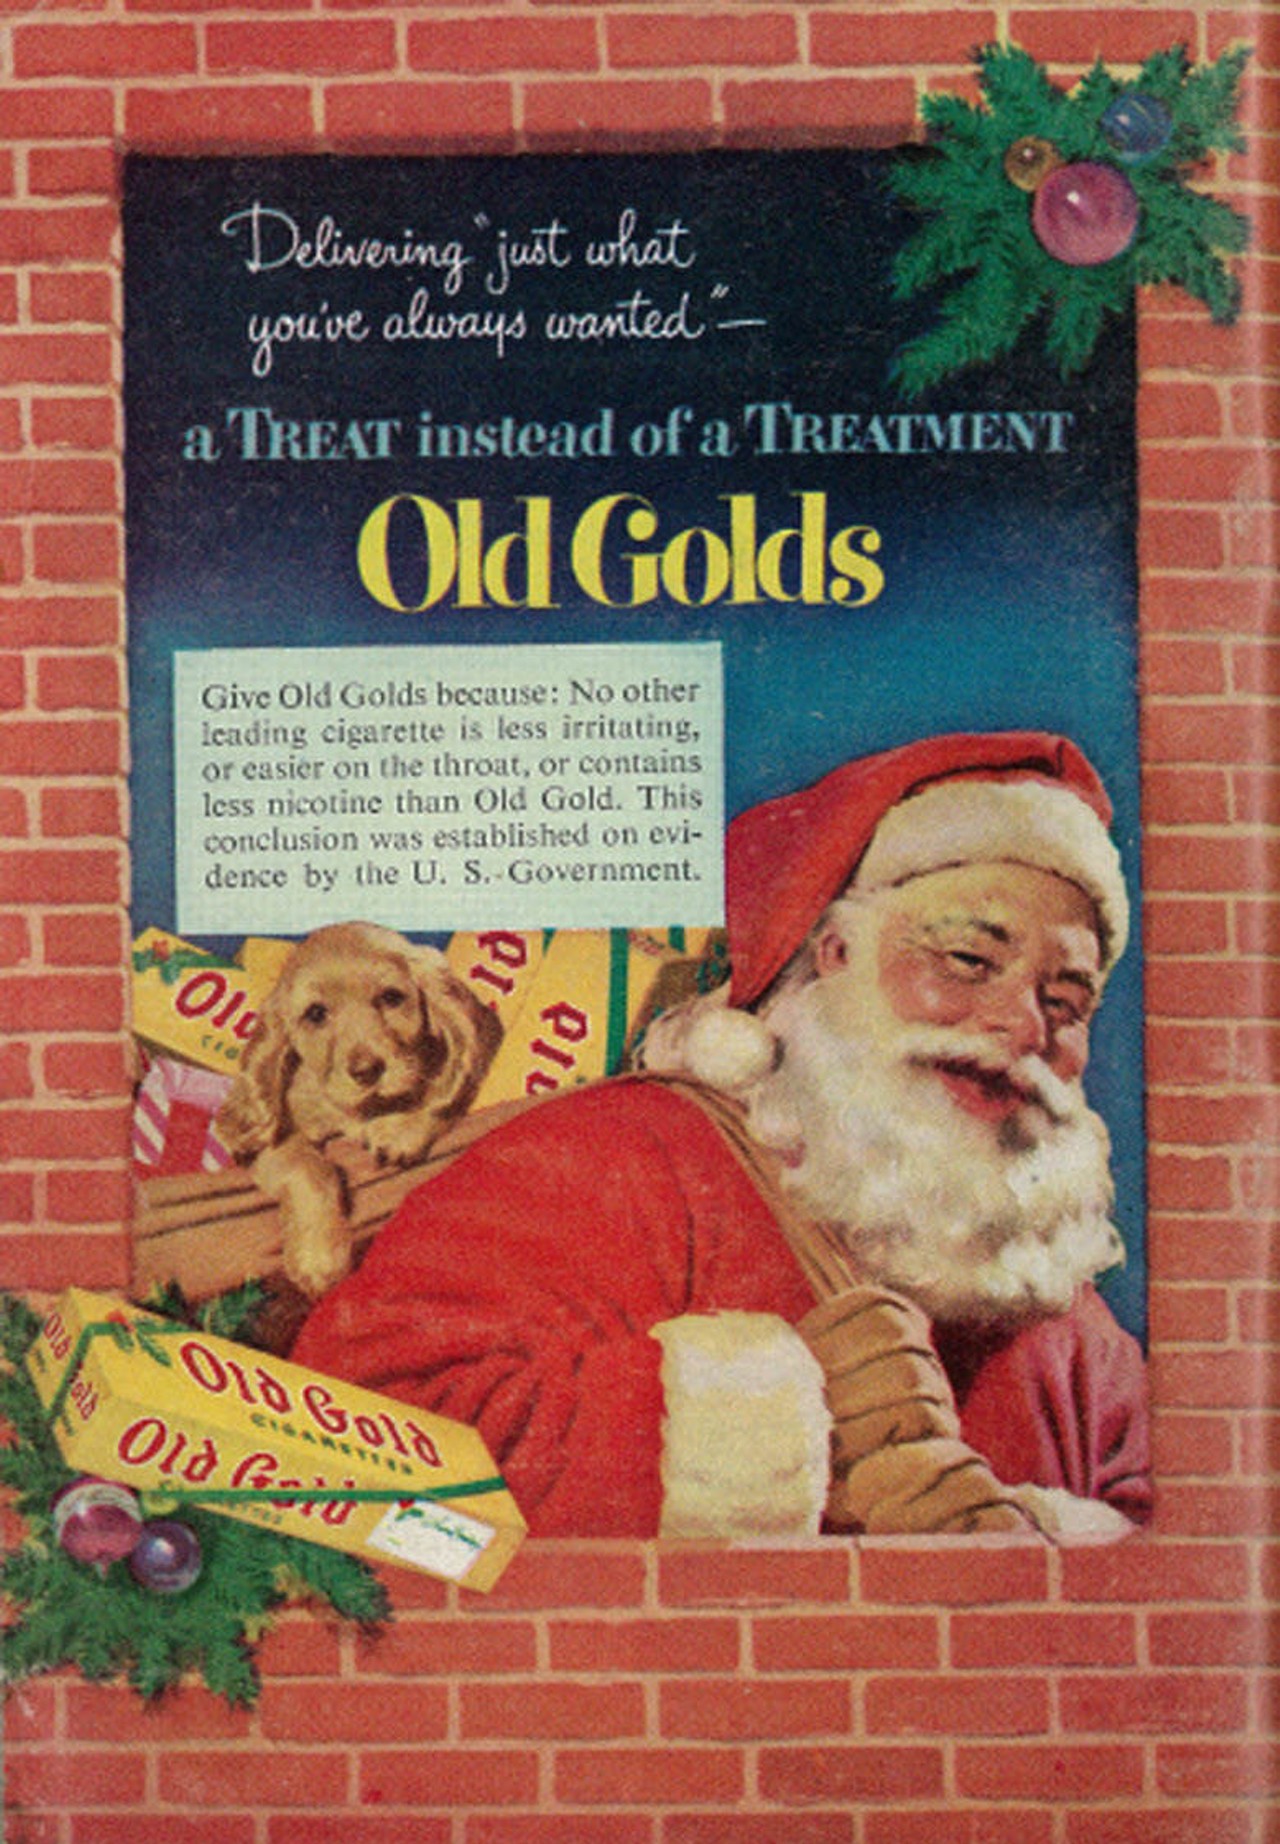 Old Gold Cigarettes with Santa, 1952 (Photo via Classic Film, Flickr Creative Commons)